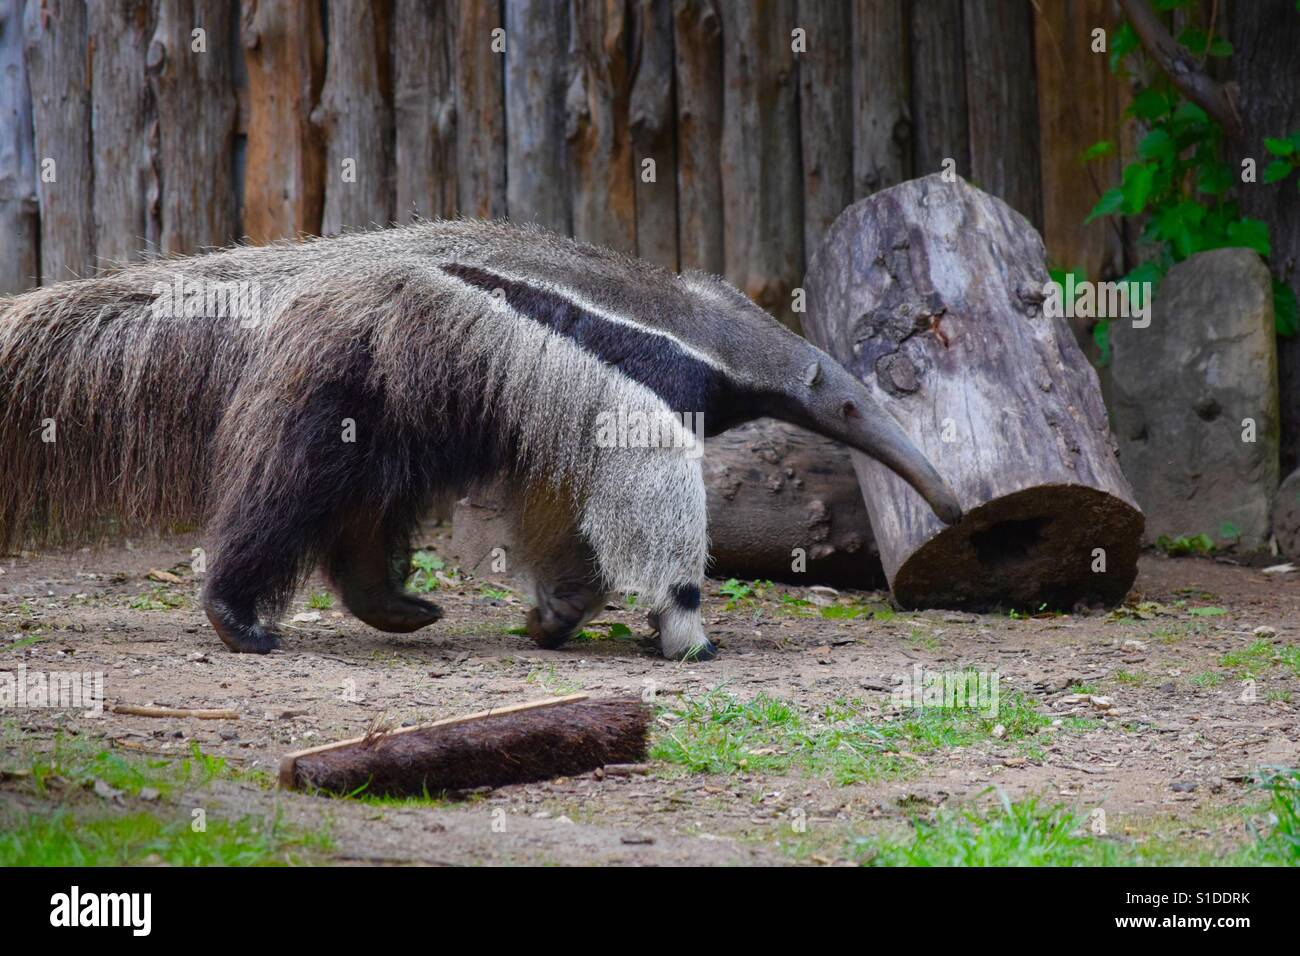 Ant eater at the zoo Stock Photo